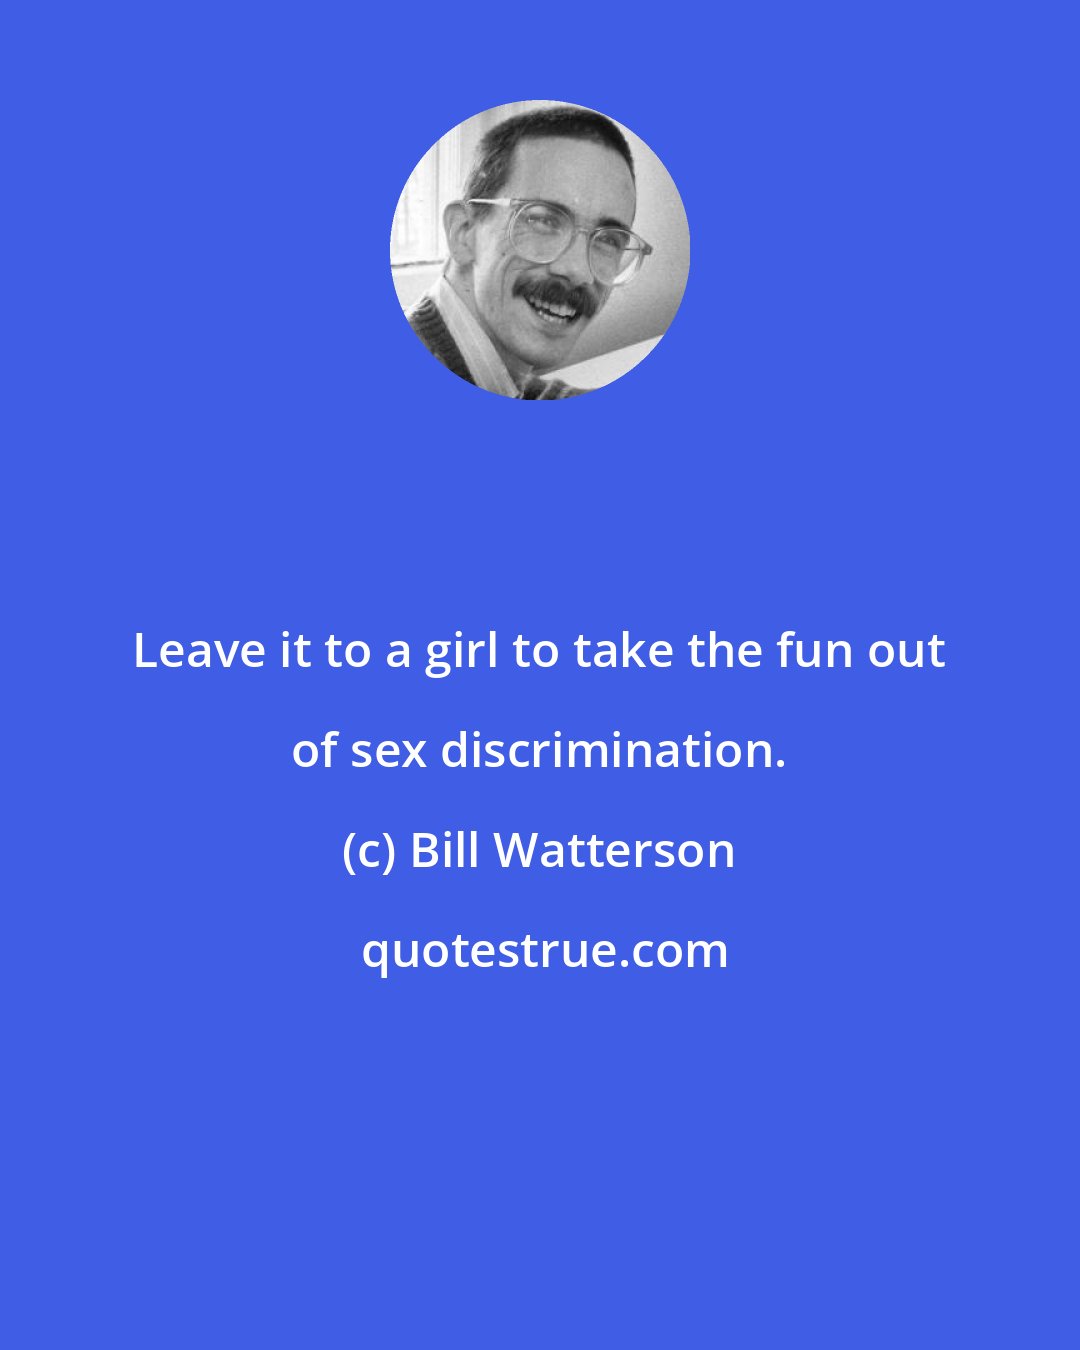 Bill Watterson: Leave it to a girl to take the fun out of sex discrimination.